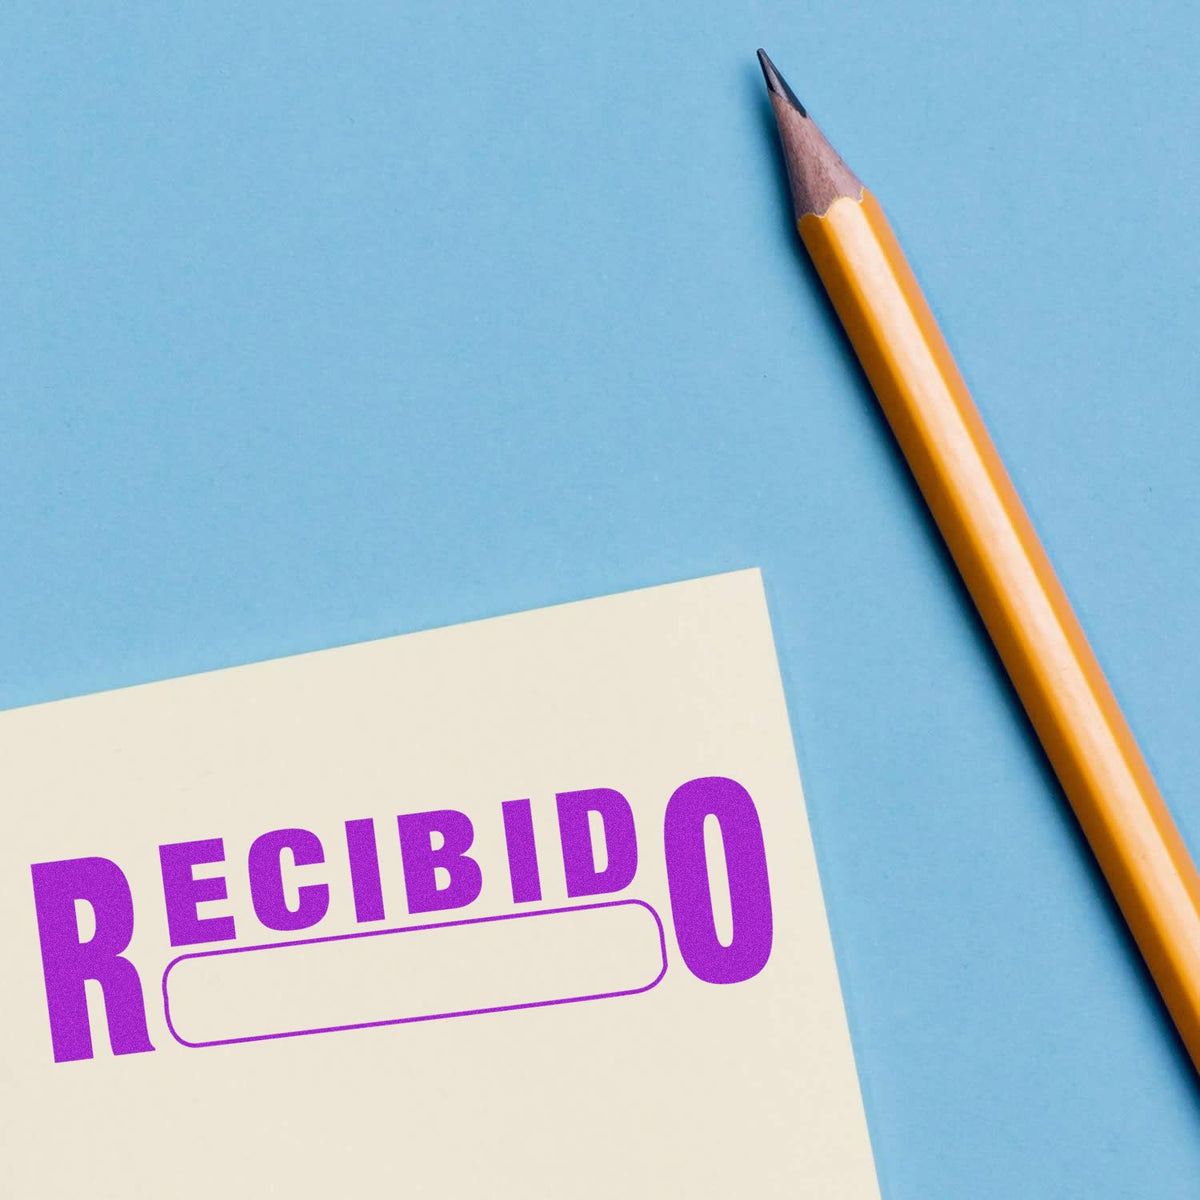 Large Self-Inking Recibido Stamp In Use